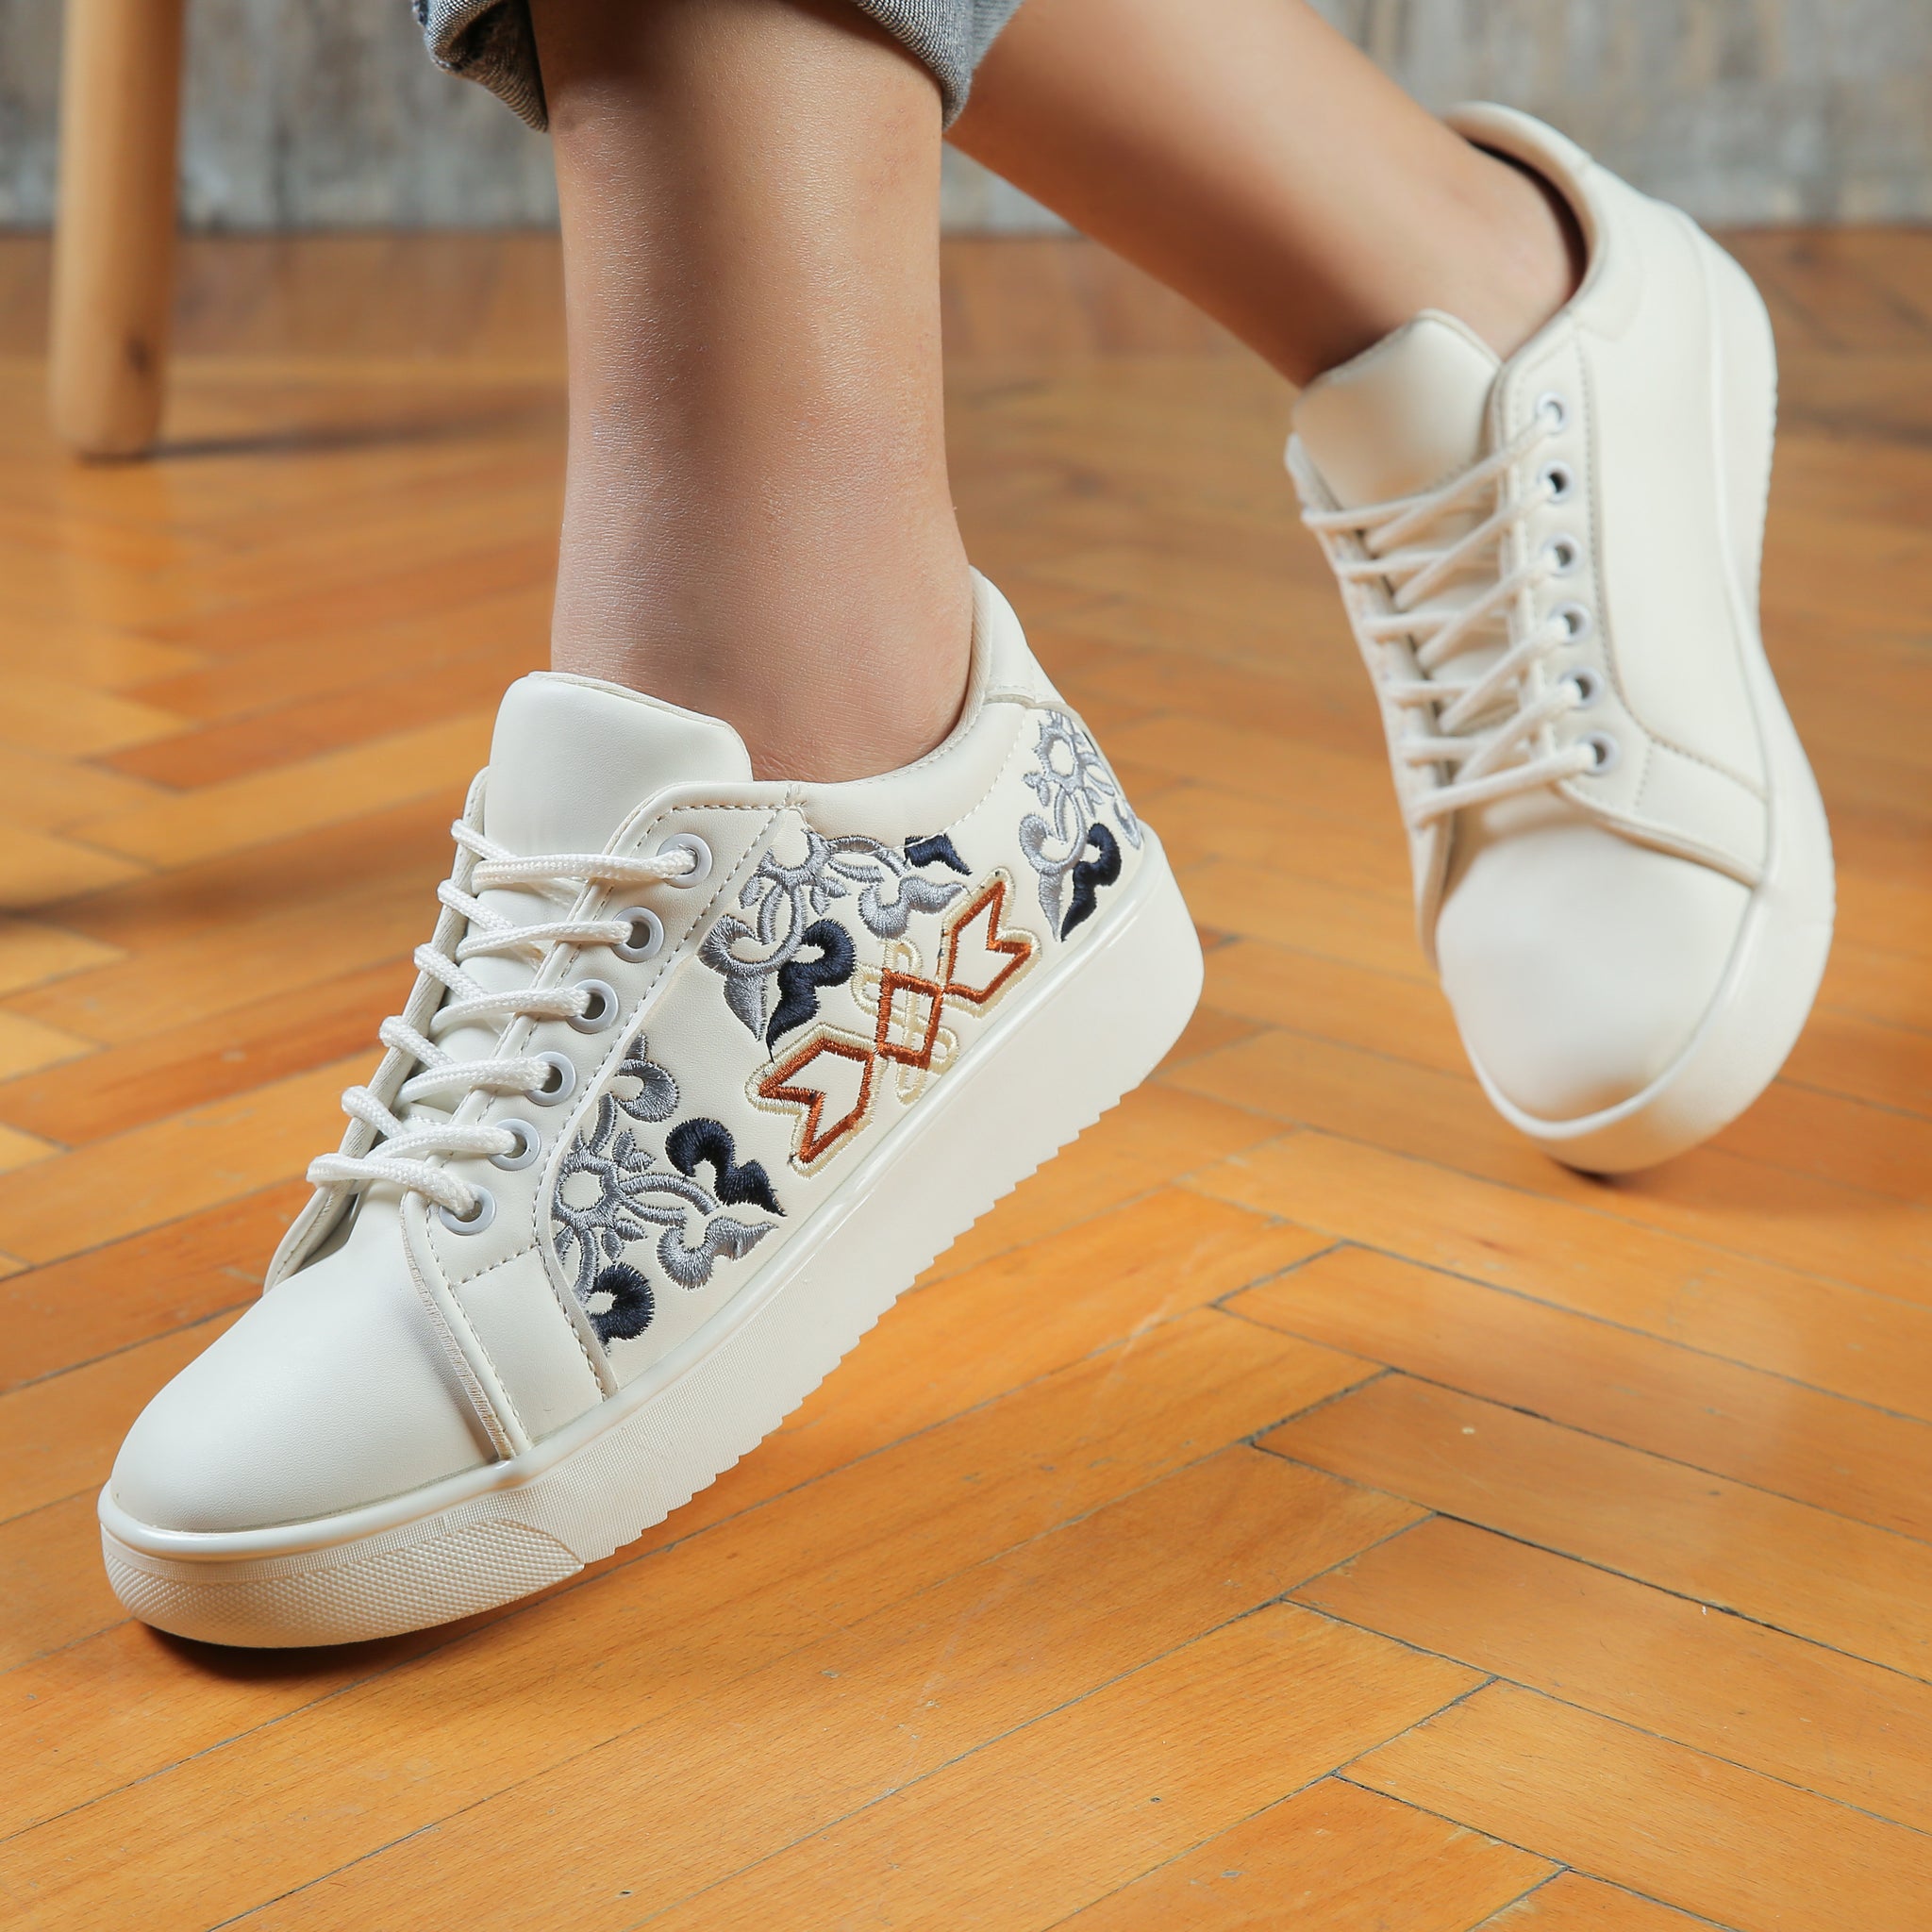 White sneakers with wings